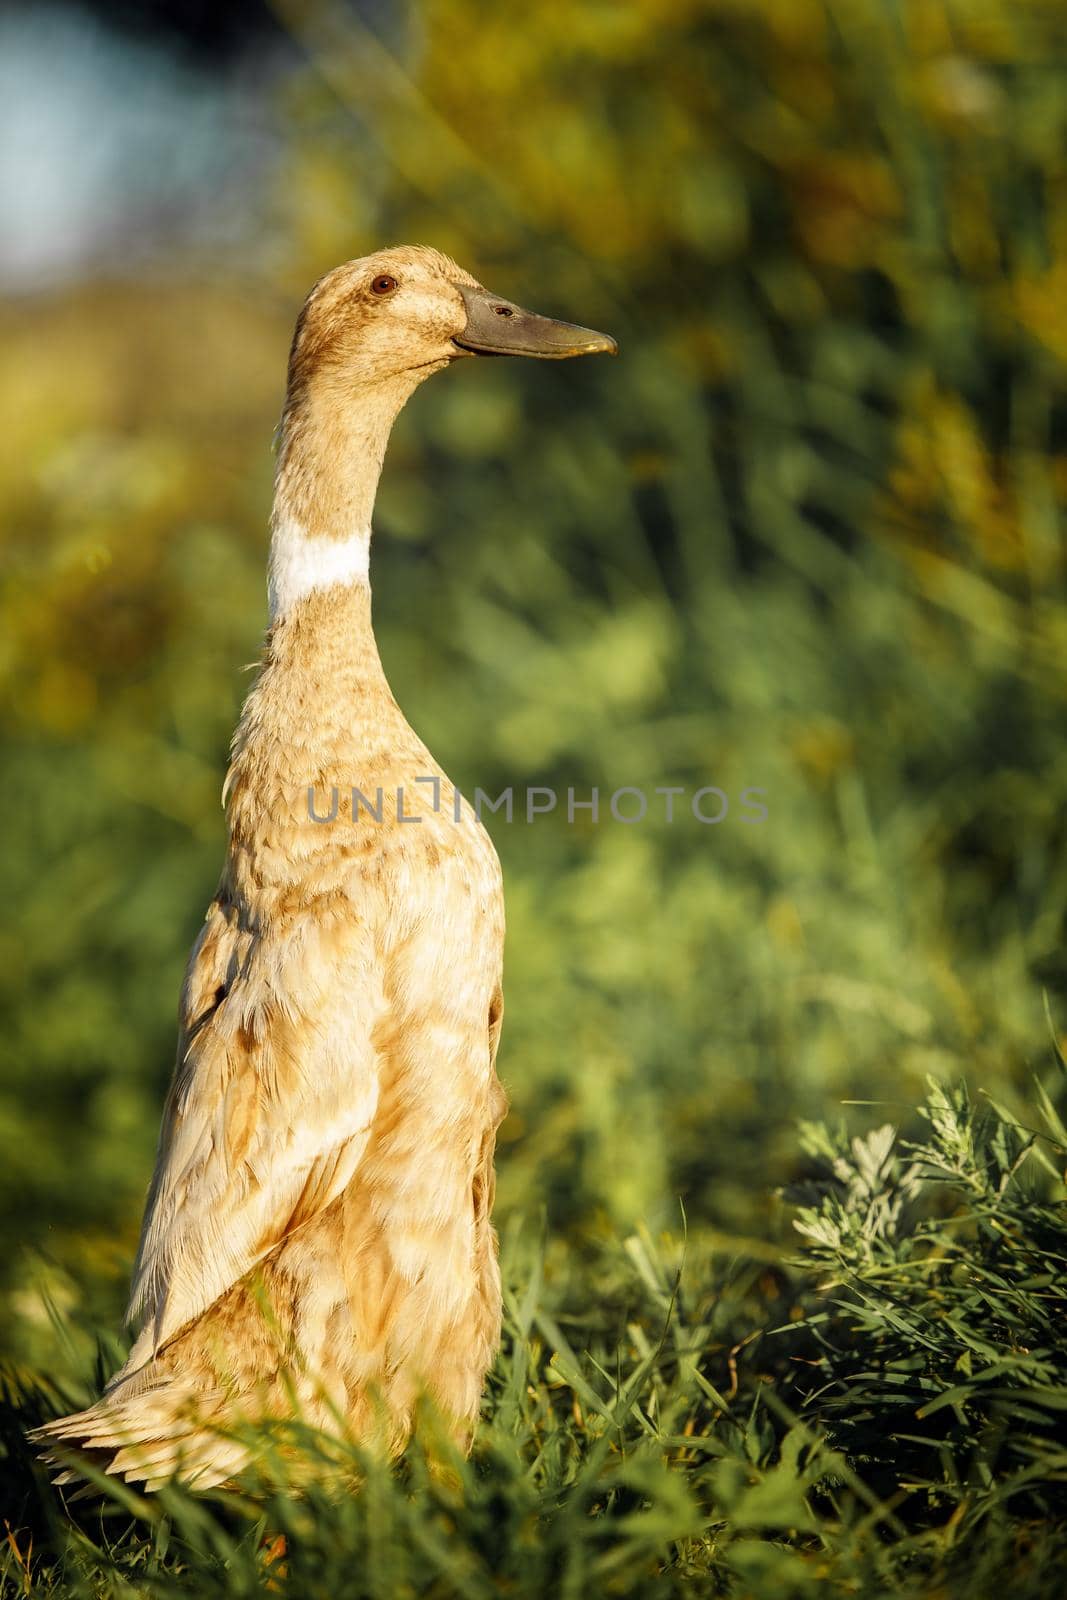 Indian Runner duck stands in a blurred plants background. They stand erect like penguins and, rather than waddling, they run.